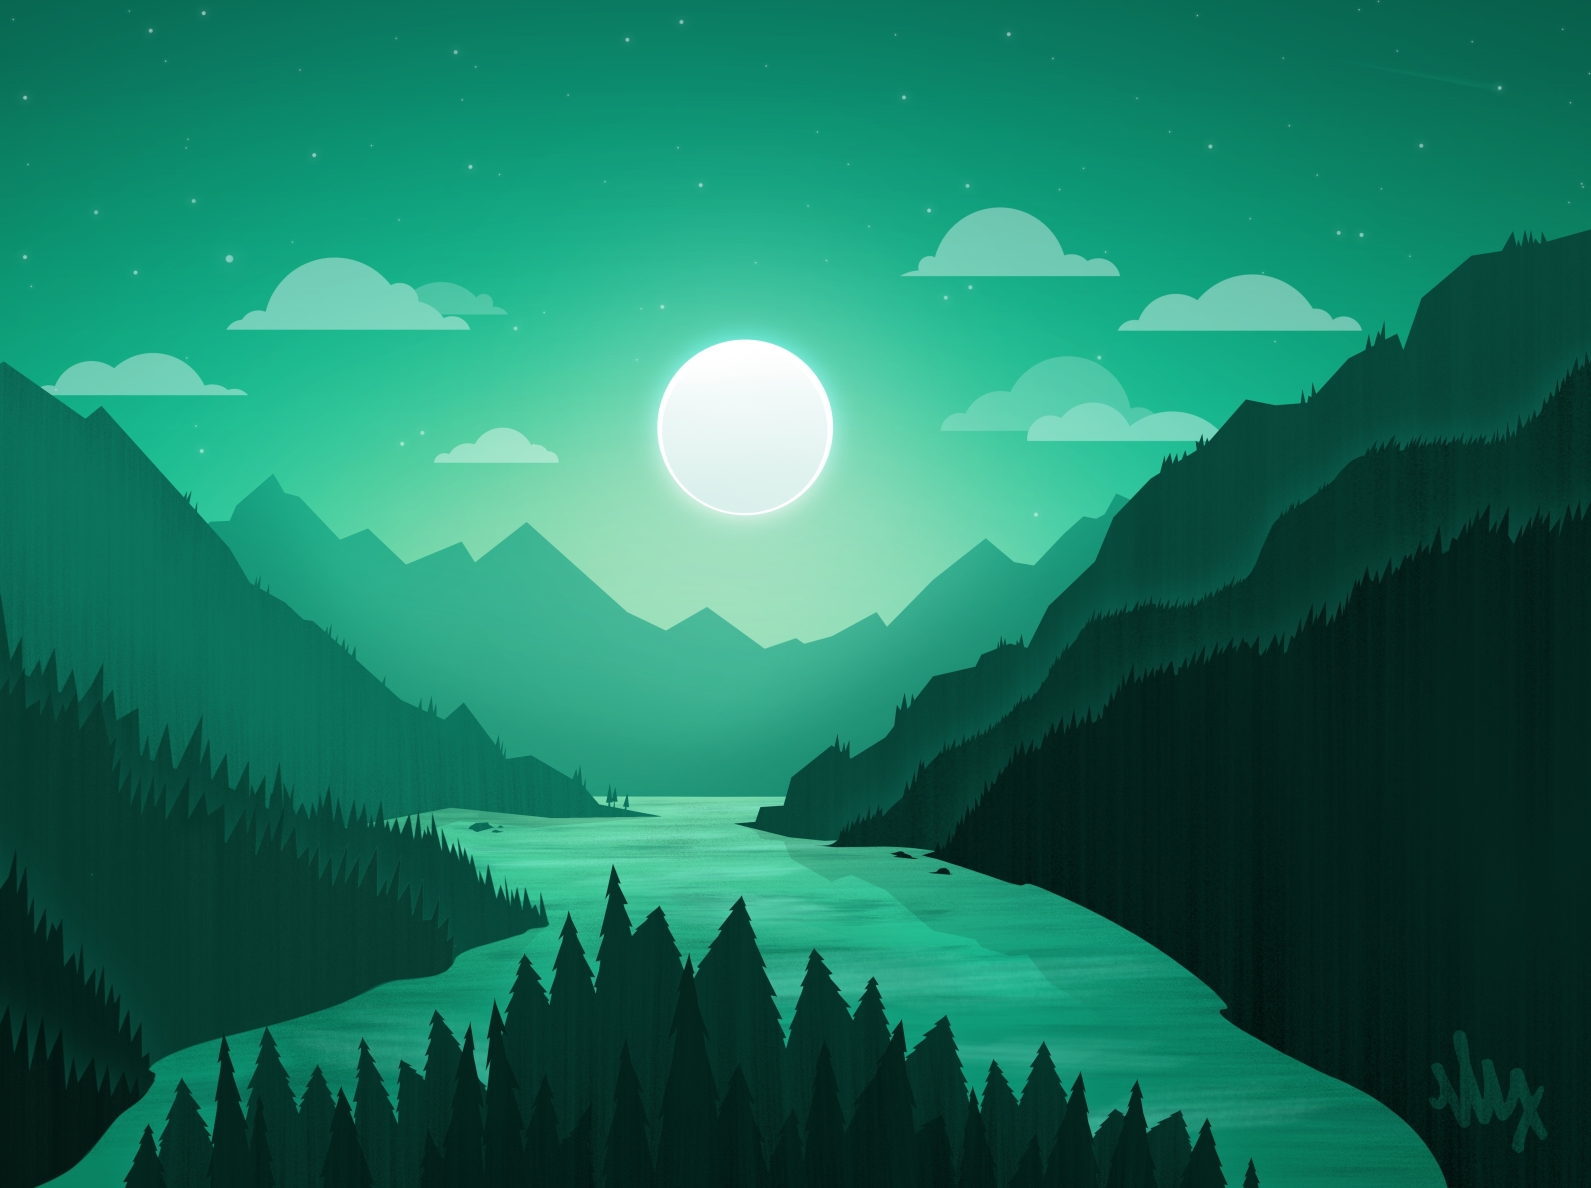 Flat Design Mountain Landscape by Max Miner on Dribbble